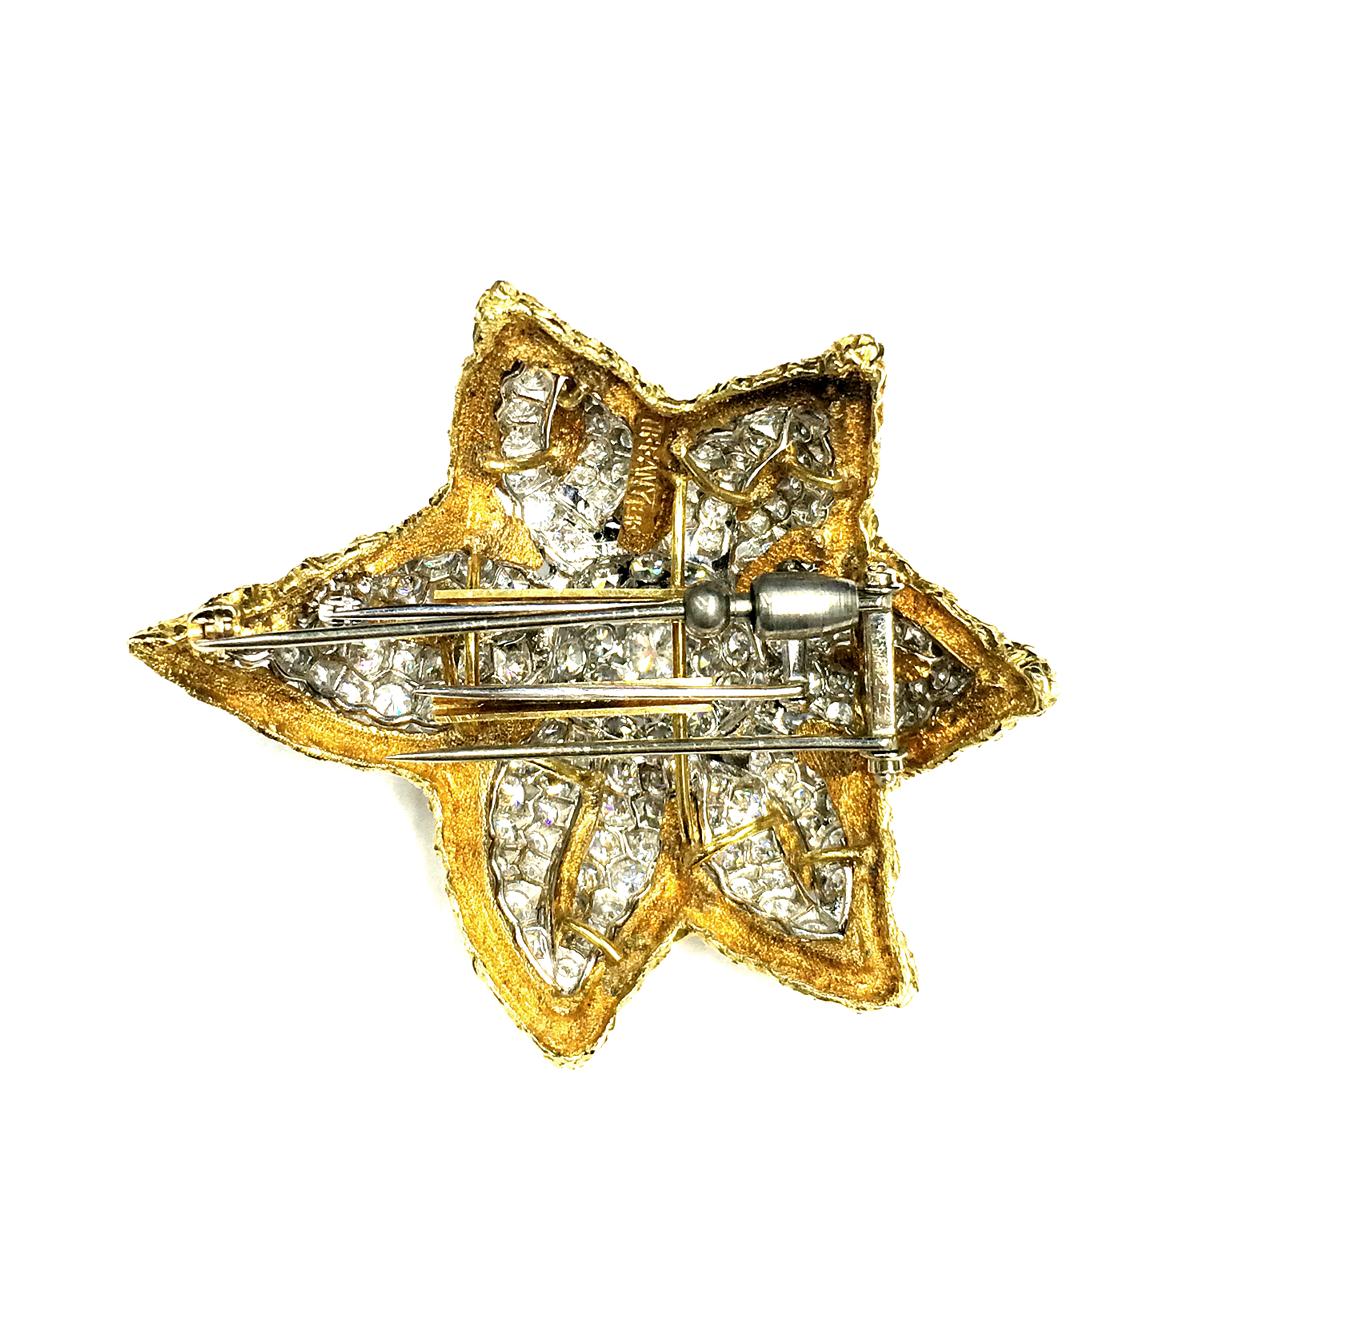 Diamond weight is 10.88cts.
Brooch dimensions: 2.4